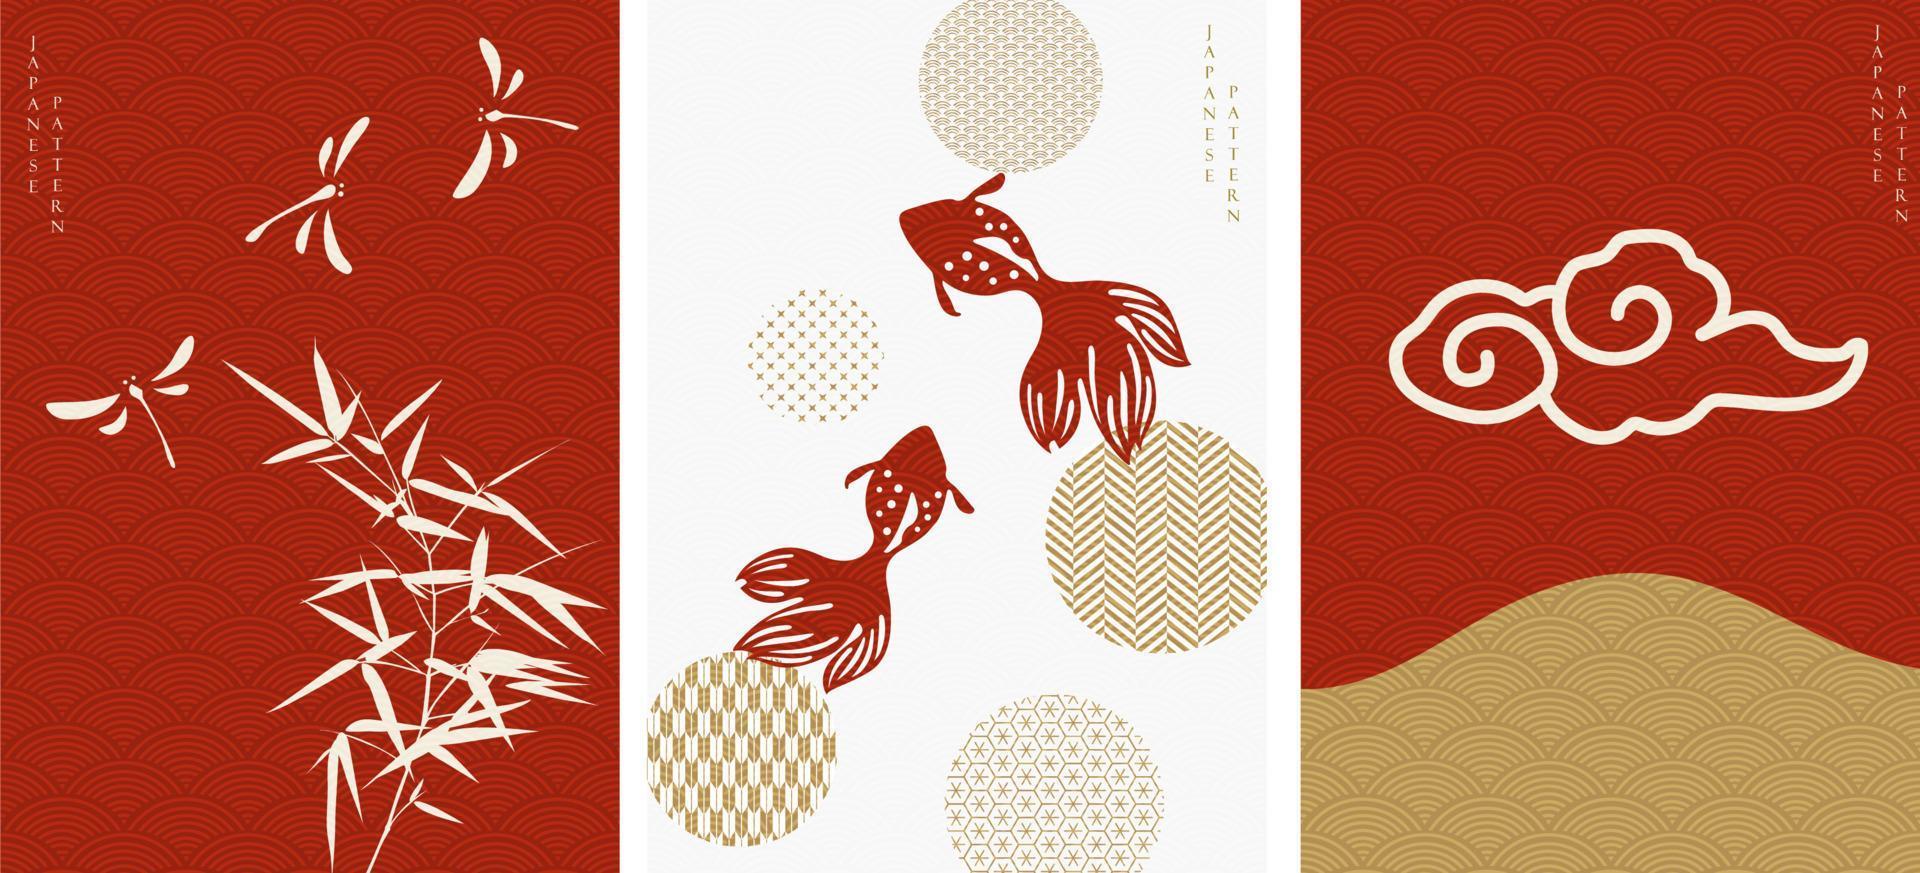 Japanese background with Asian icons and symbol vector. Dragonfly, bamboo, goldfish elements in oriental style. vector